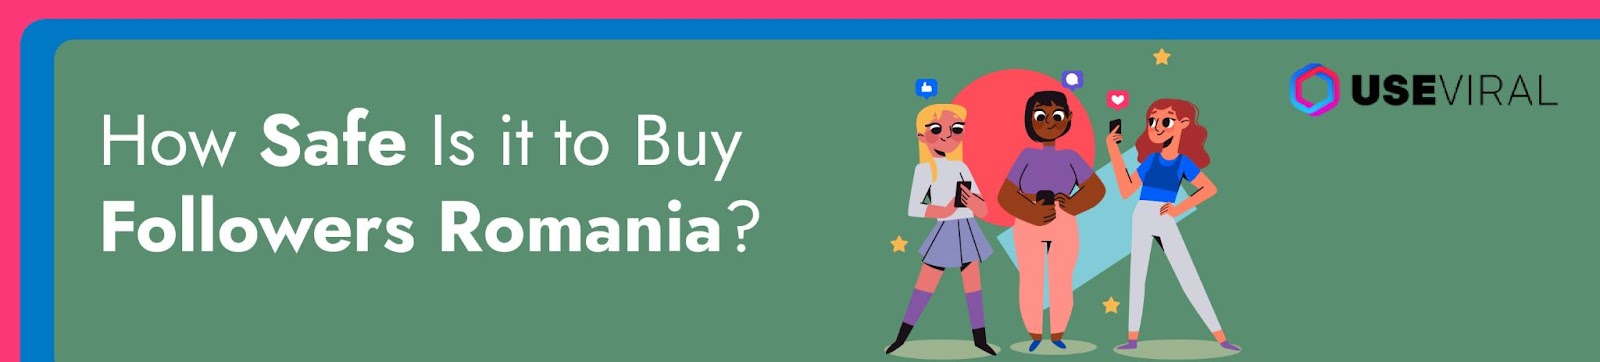 How Safe Is it to Buy Followers Romania?